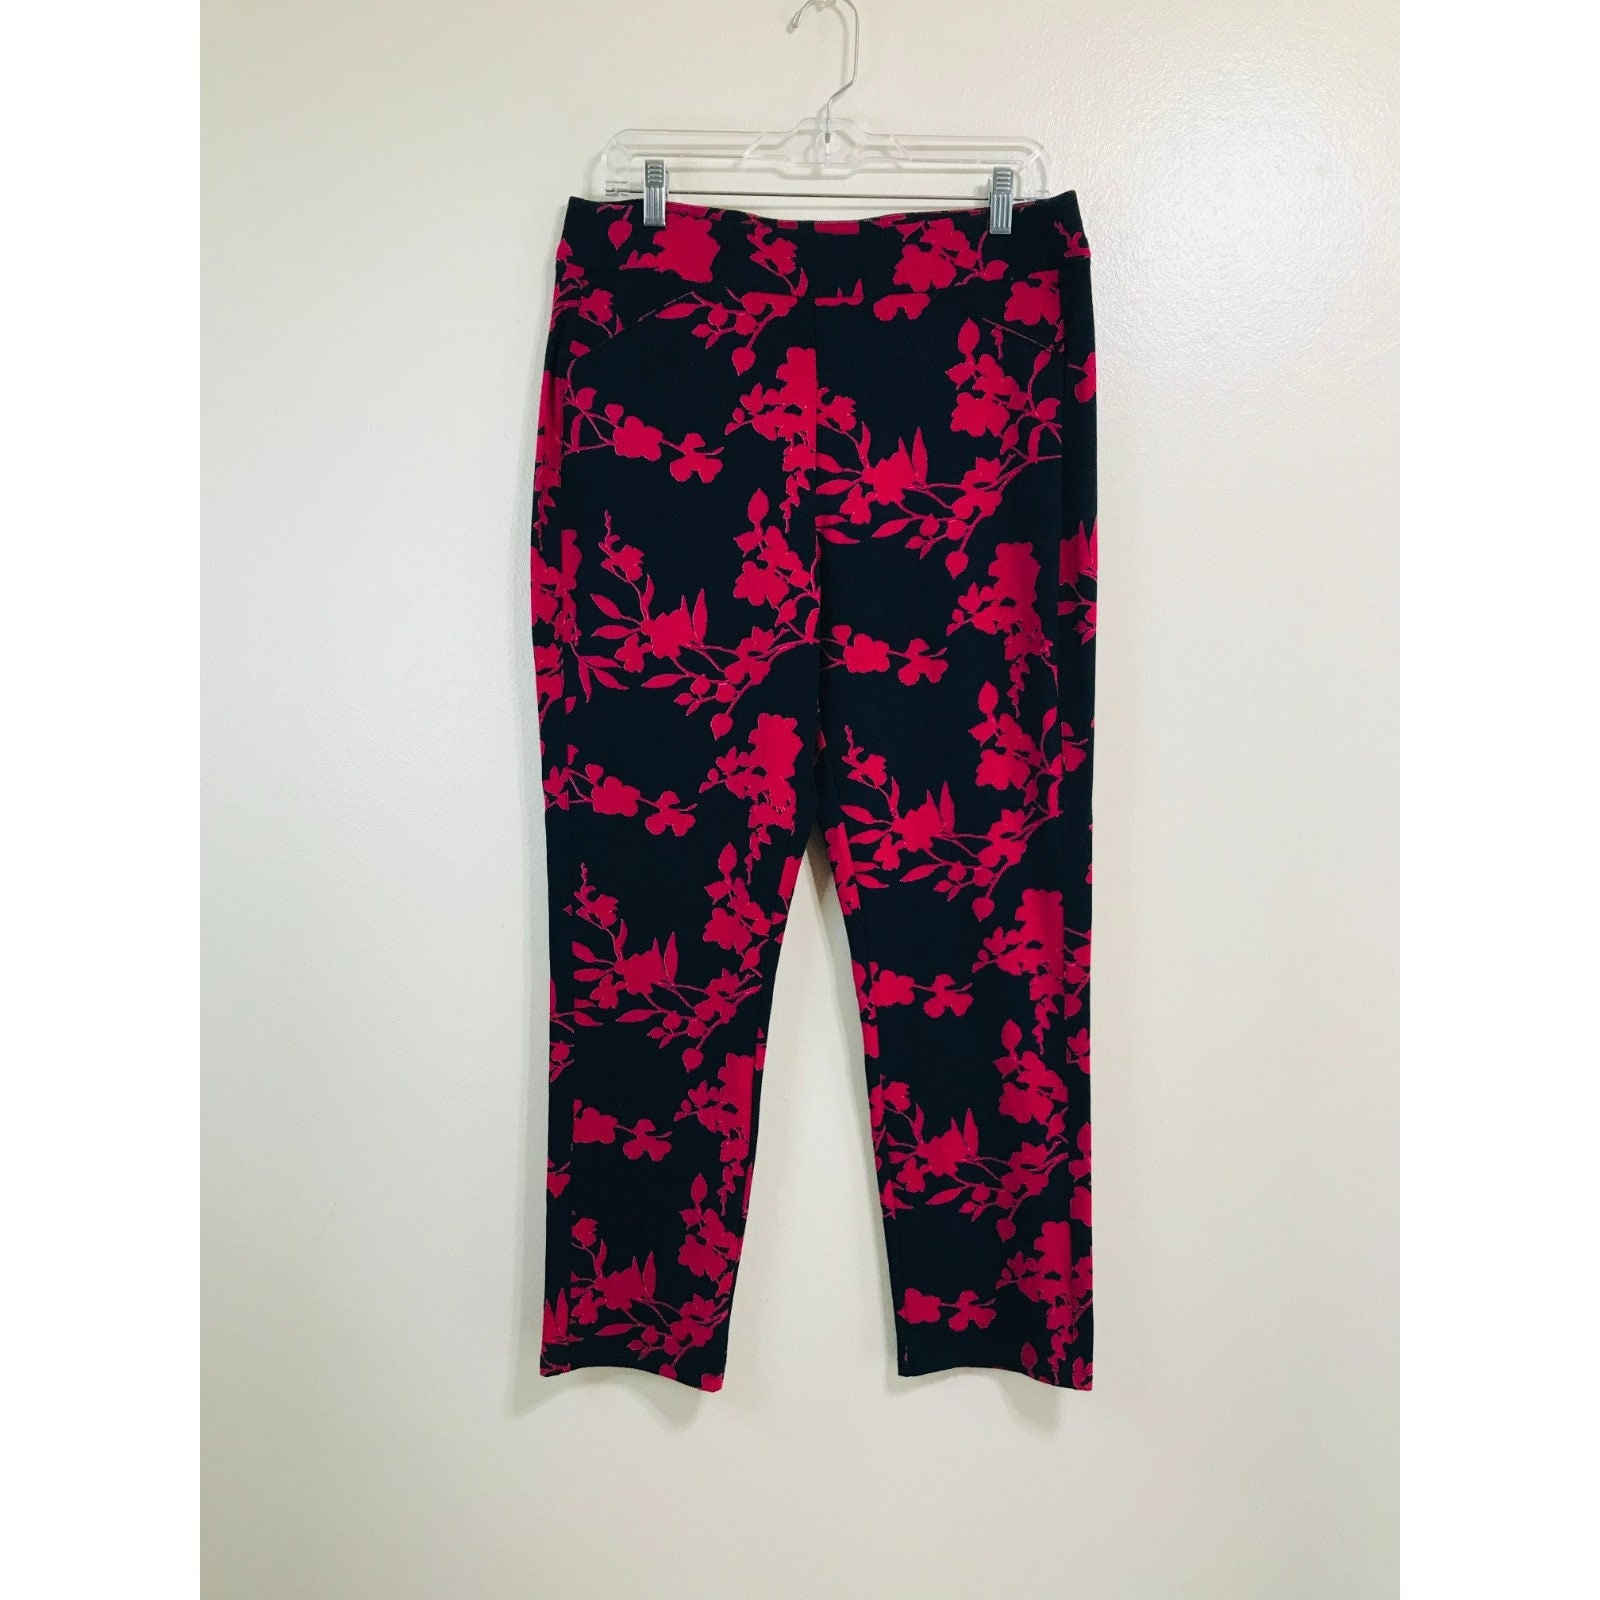 Chico's, Pants & Jumpsuits, Chicos So Slimming Red Stretch Pants Size